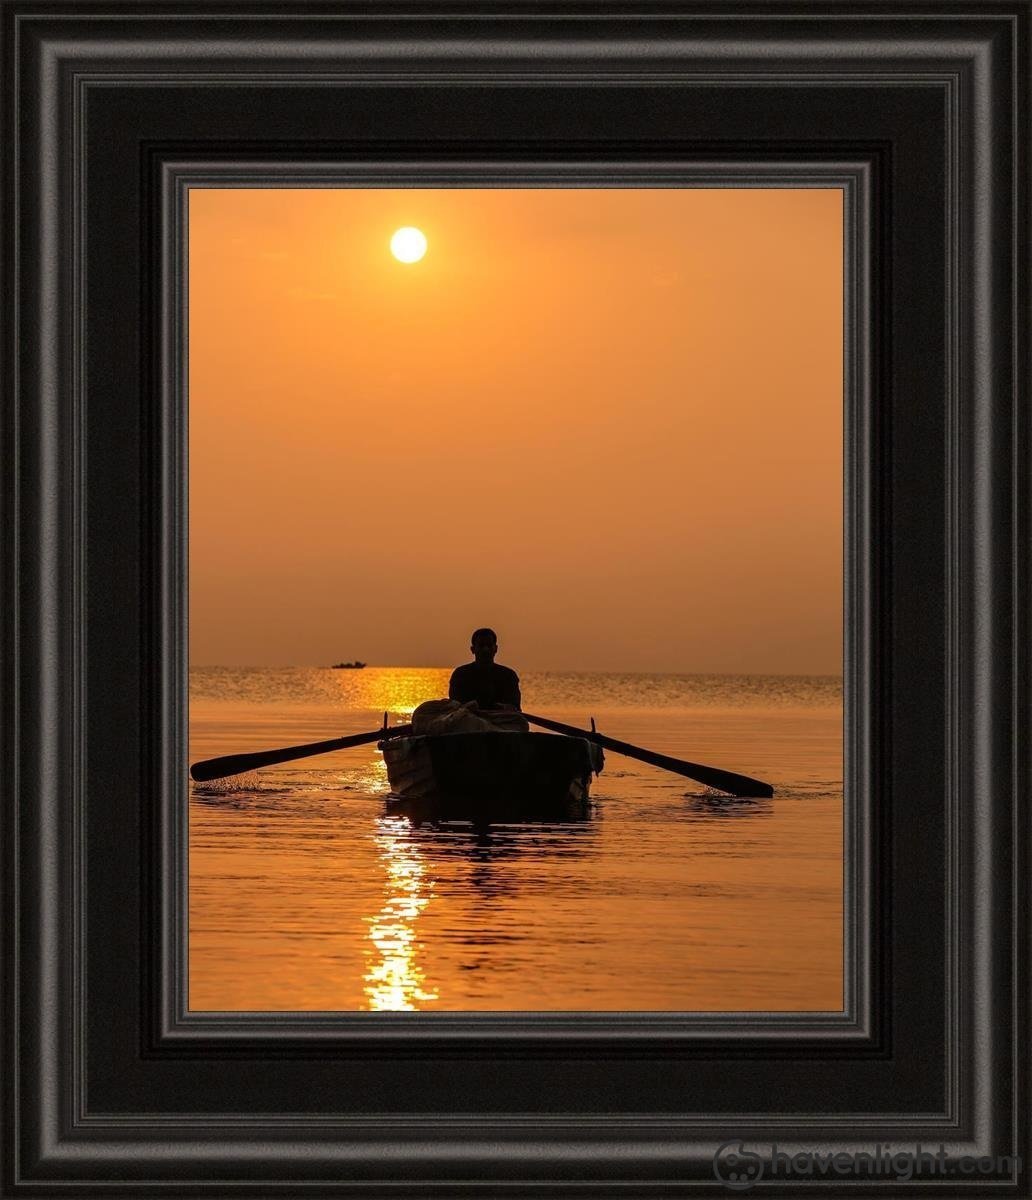 Plate 7 - Fishers Of Men Series 2 Open Edition Print / 8 X 10 Frame C 14 1/4 12 Art